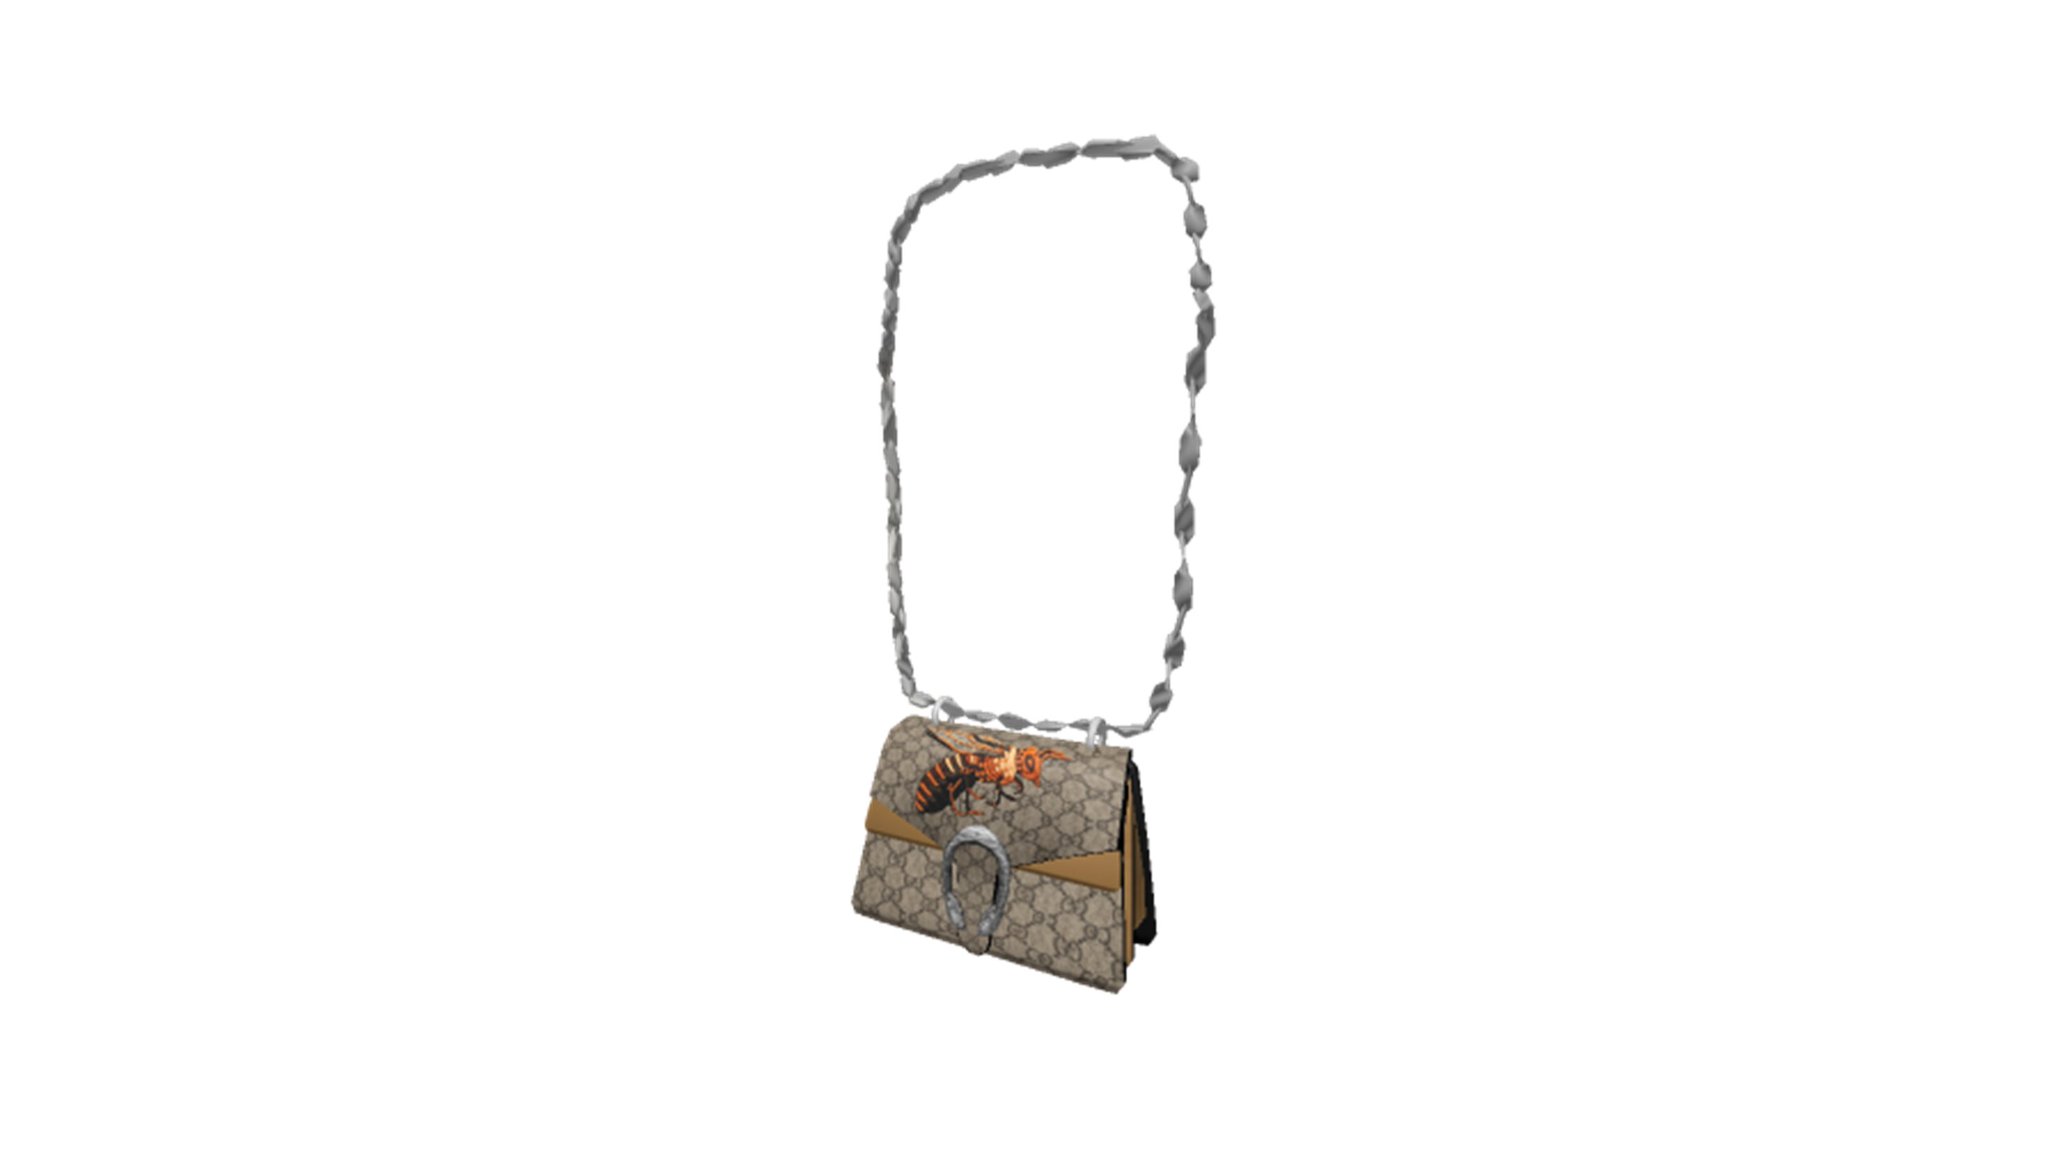 Bloxy News On Twitter Roblox Has Released Another Limited Item This Is The First Limited Item Since October 2019 Gucci Dionysus Bag With Bee Https T Co Pmakia9l4l Https T Co Ktjczqn8xc - roblox backpack